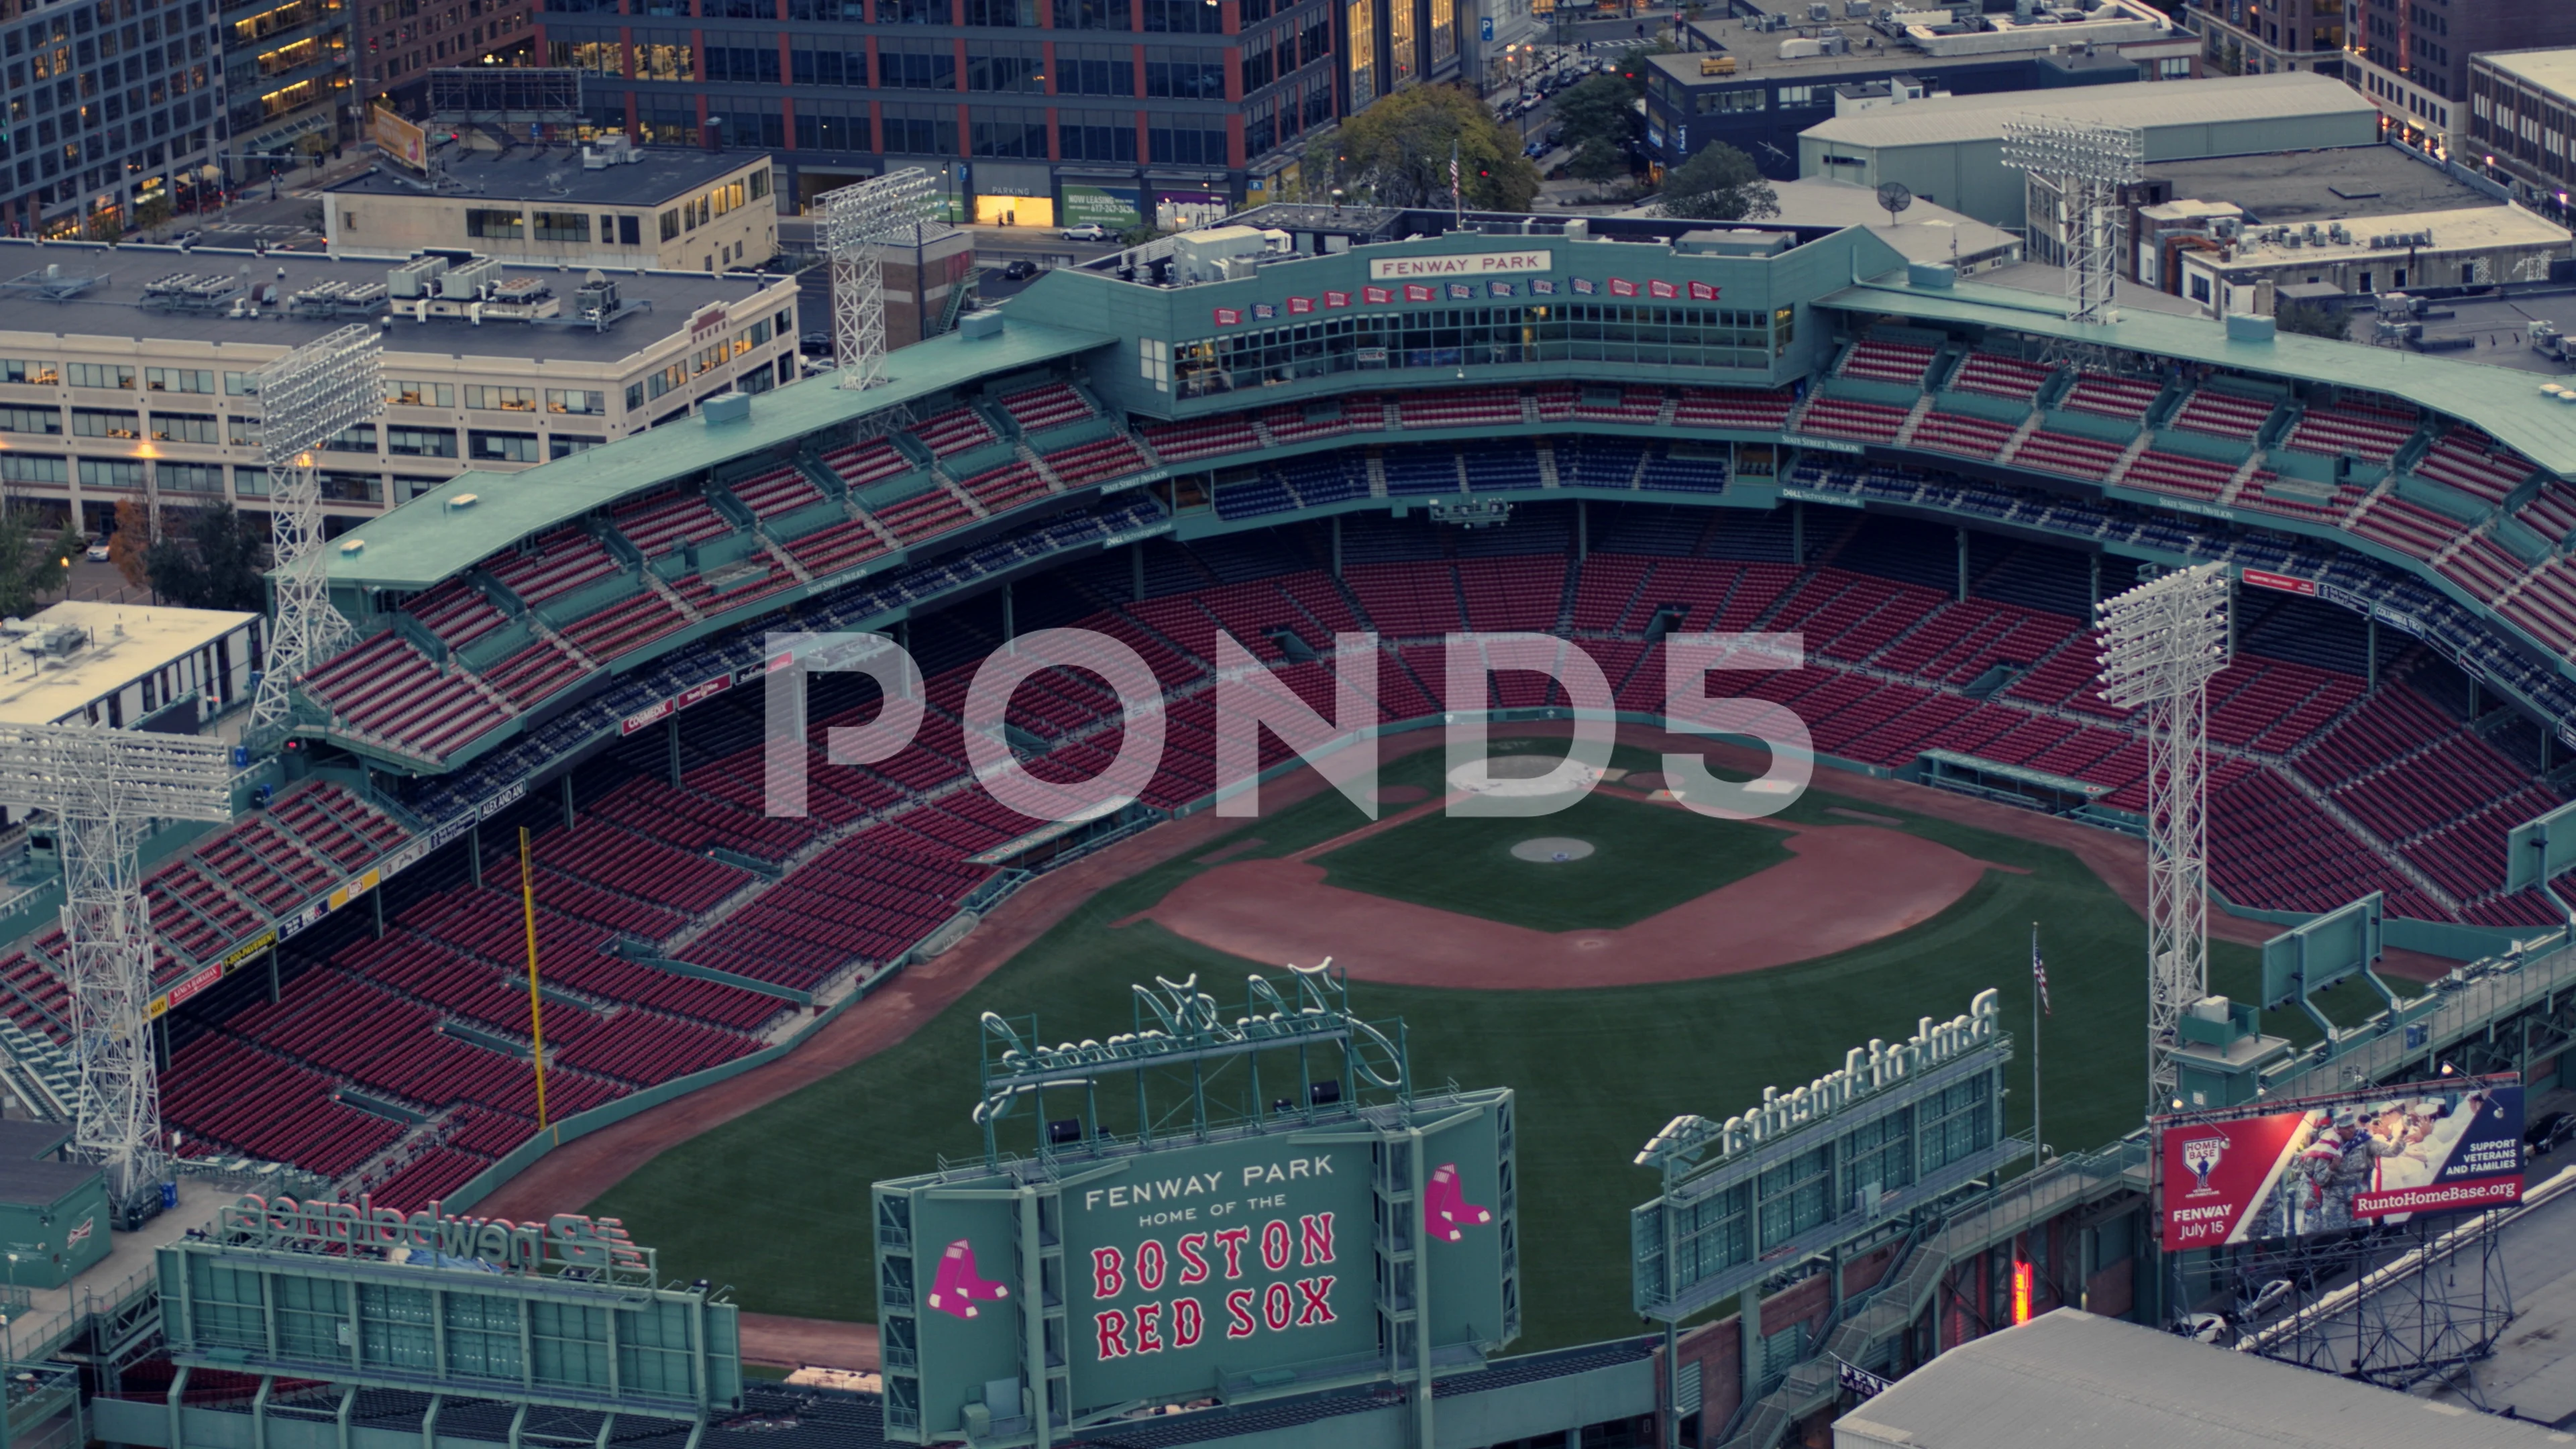 Fenway Park Panorama - Boston Red Sox - Exterior View